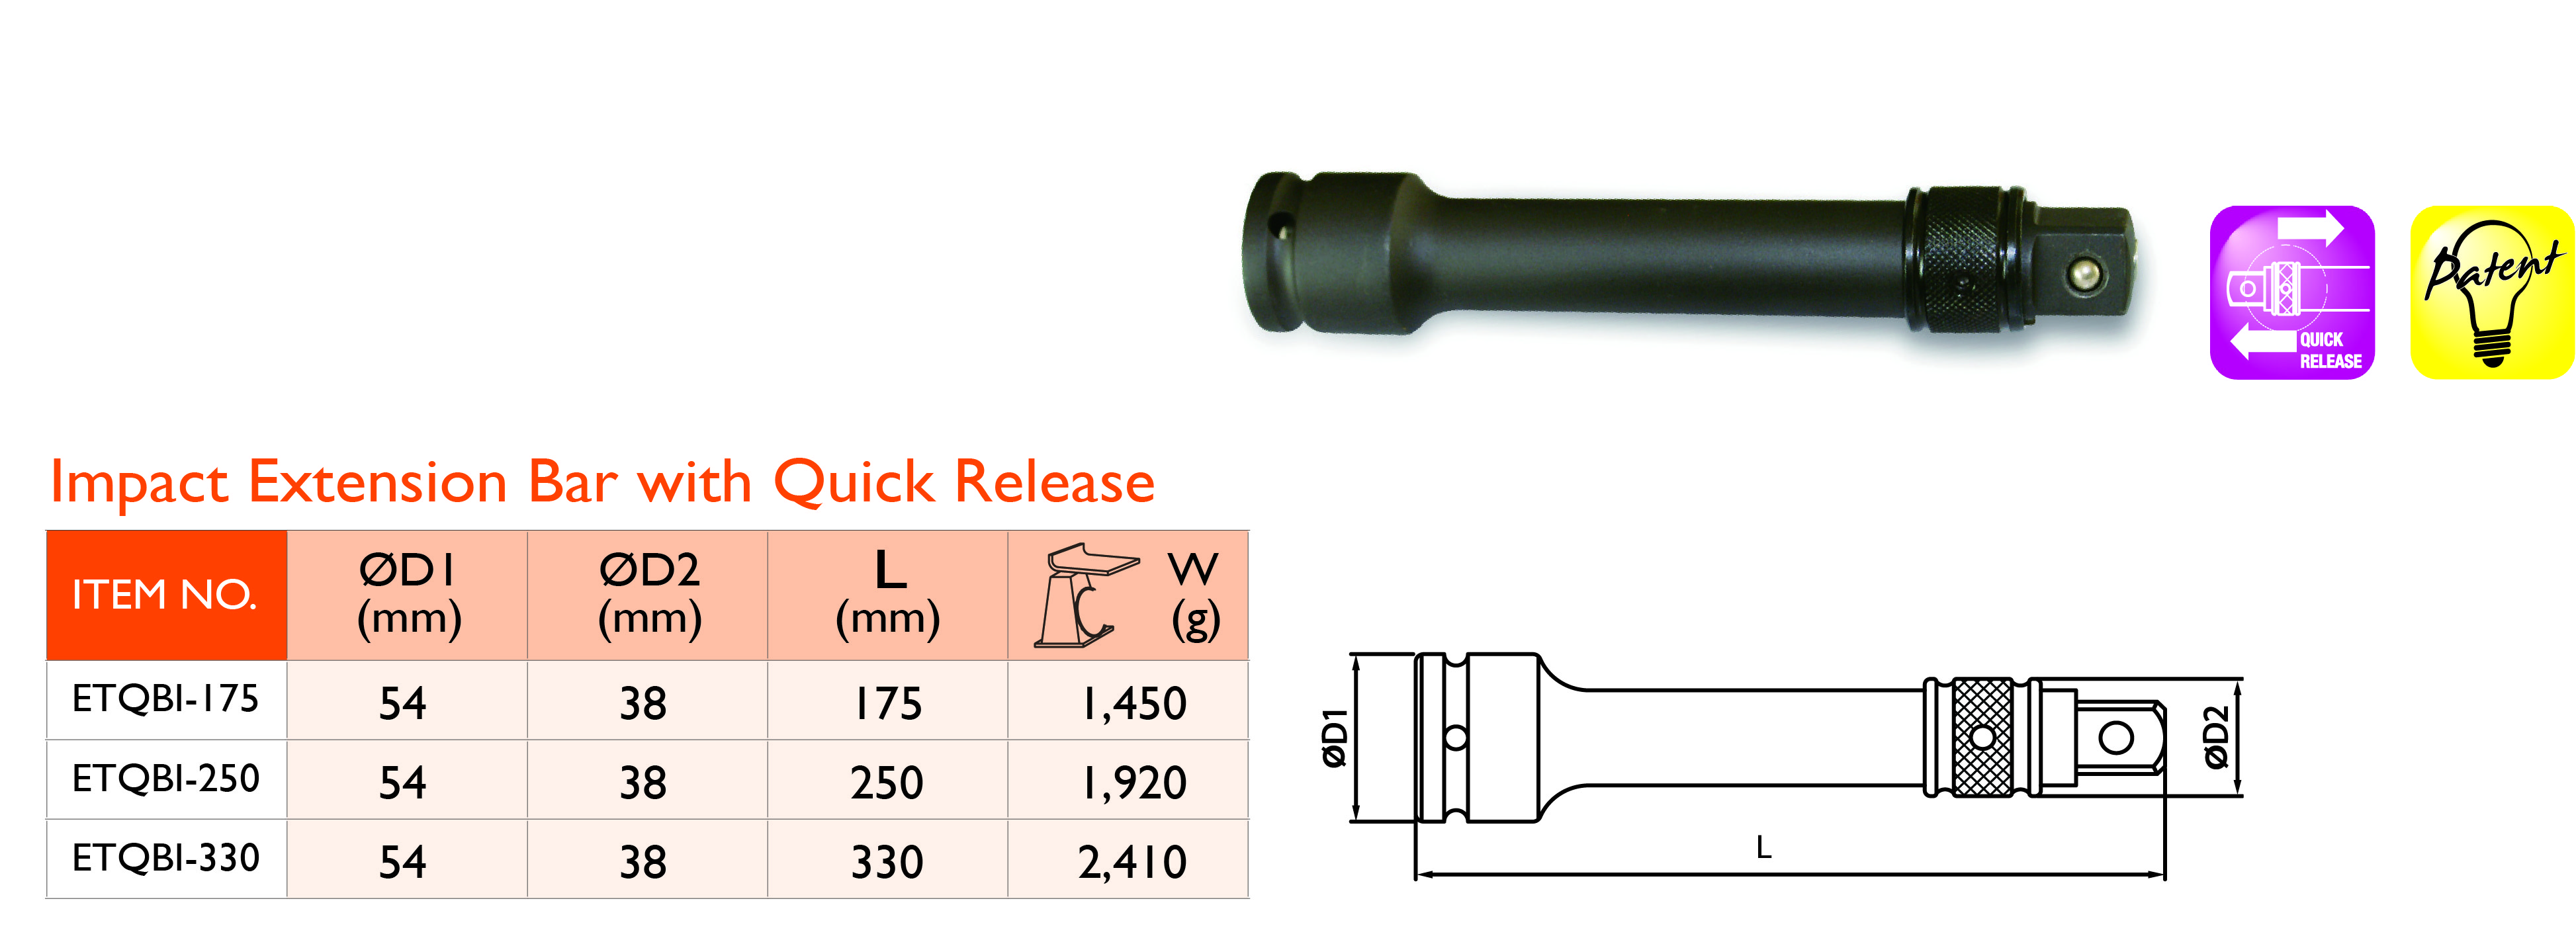 8_11 Impact Extension Bar with Quick Release_A.jpg